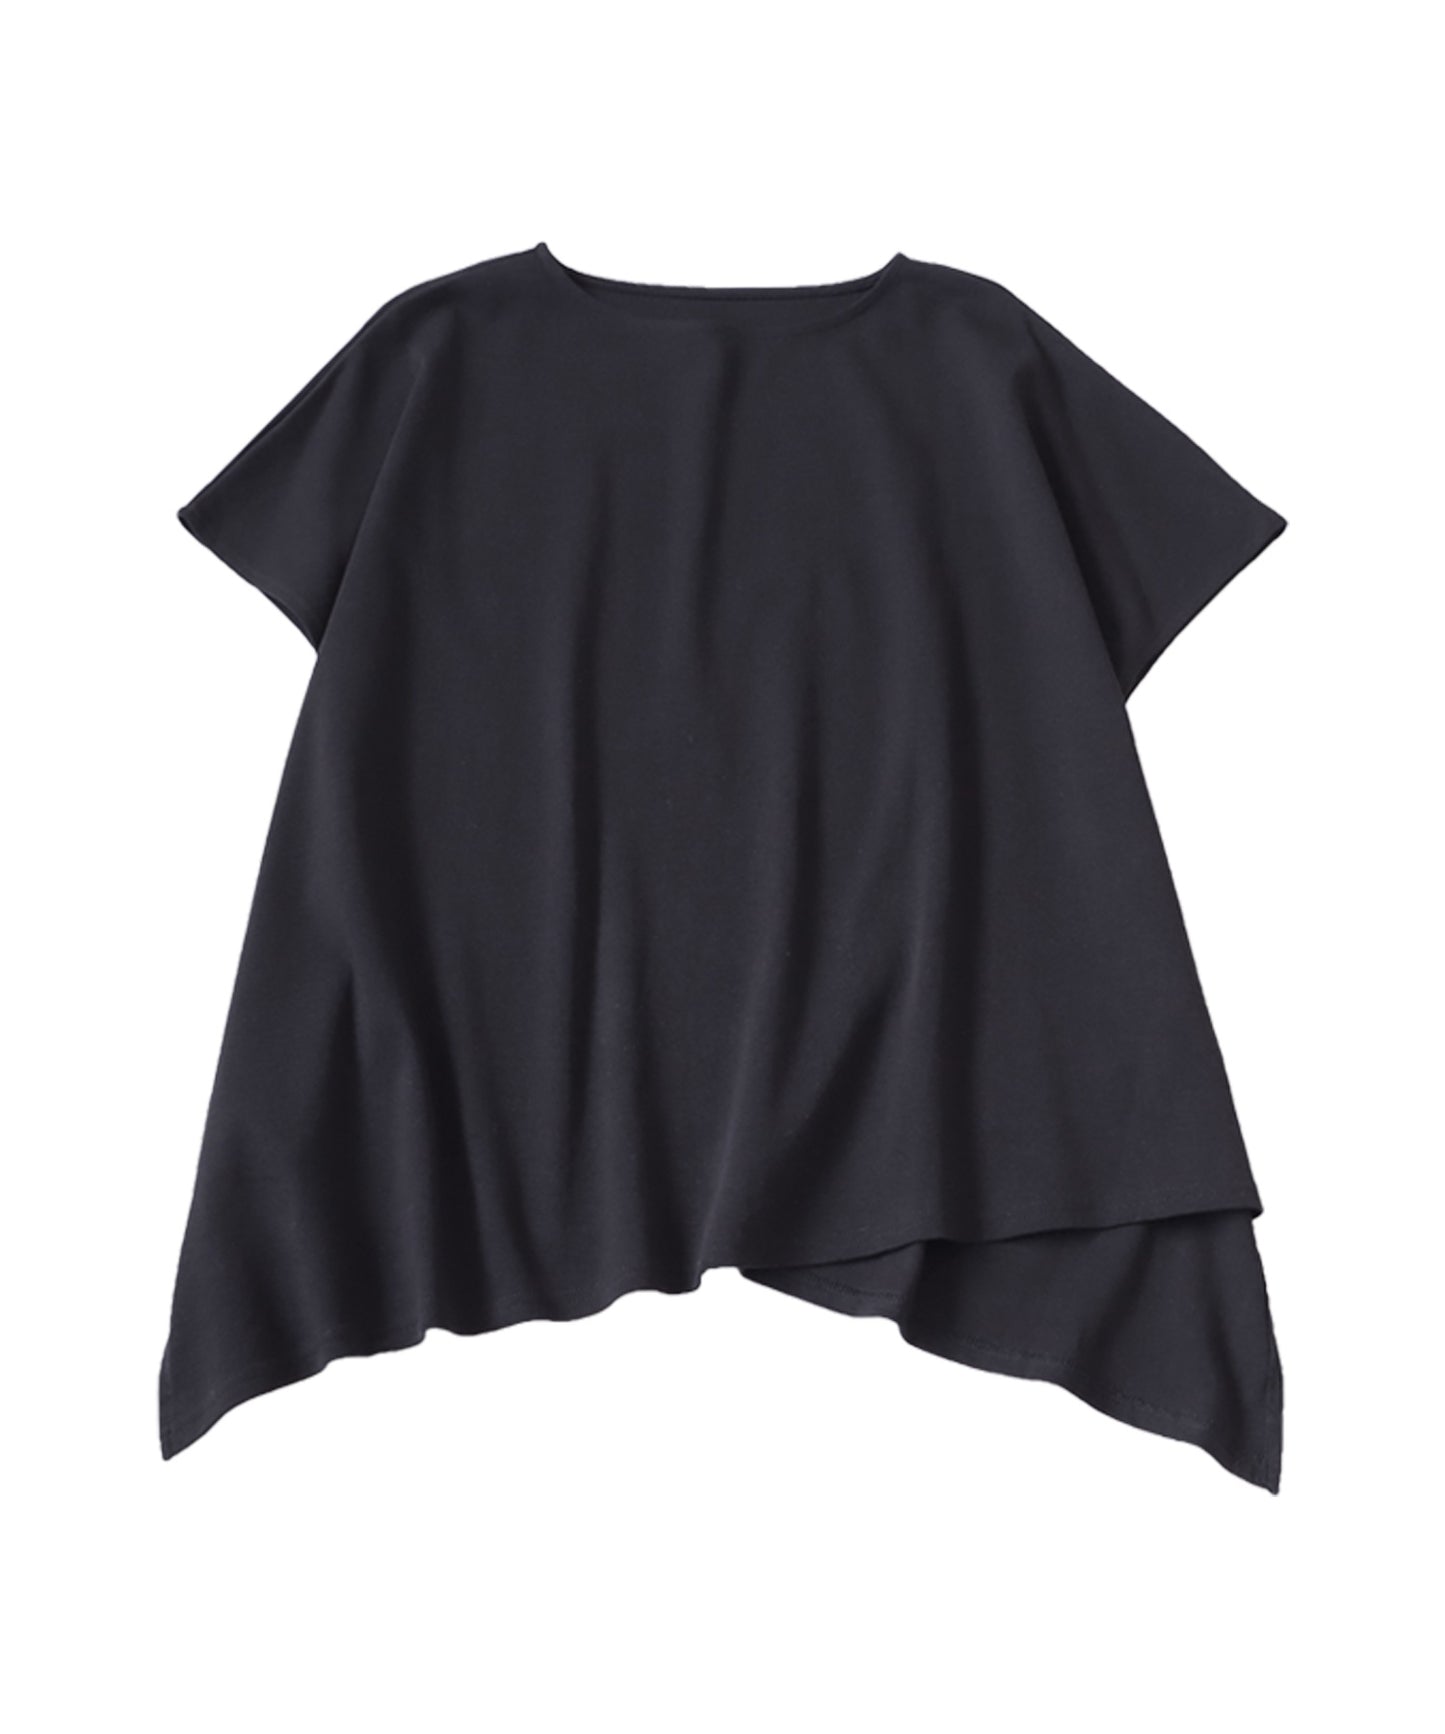 French Sleeve T-Shirt Ladies